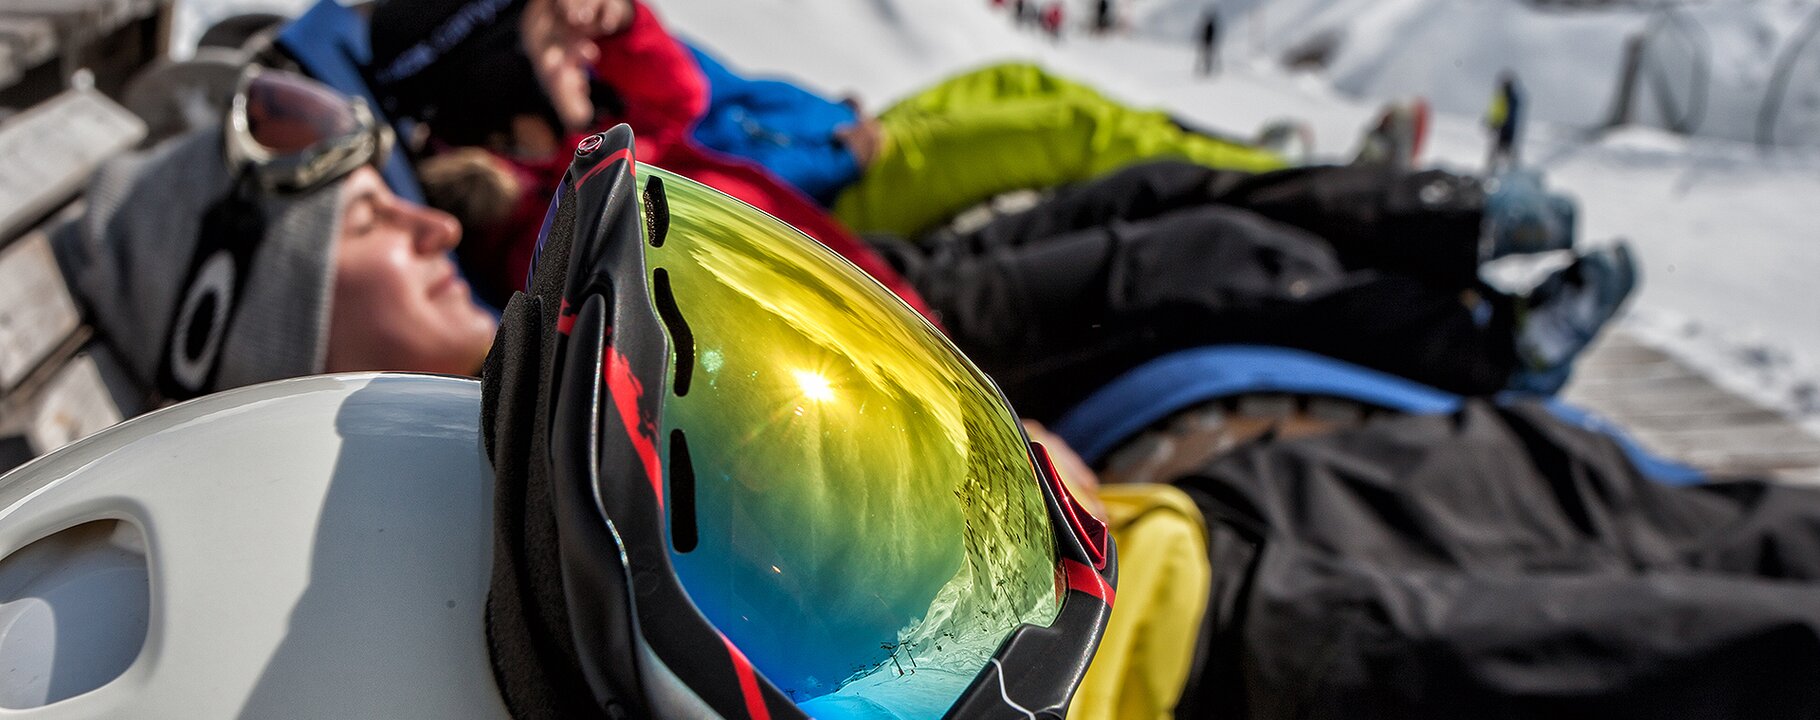 enjoy the sun - feel well directly at the slopes | © Andreas Kirschner